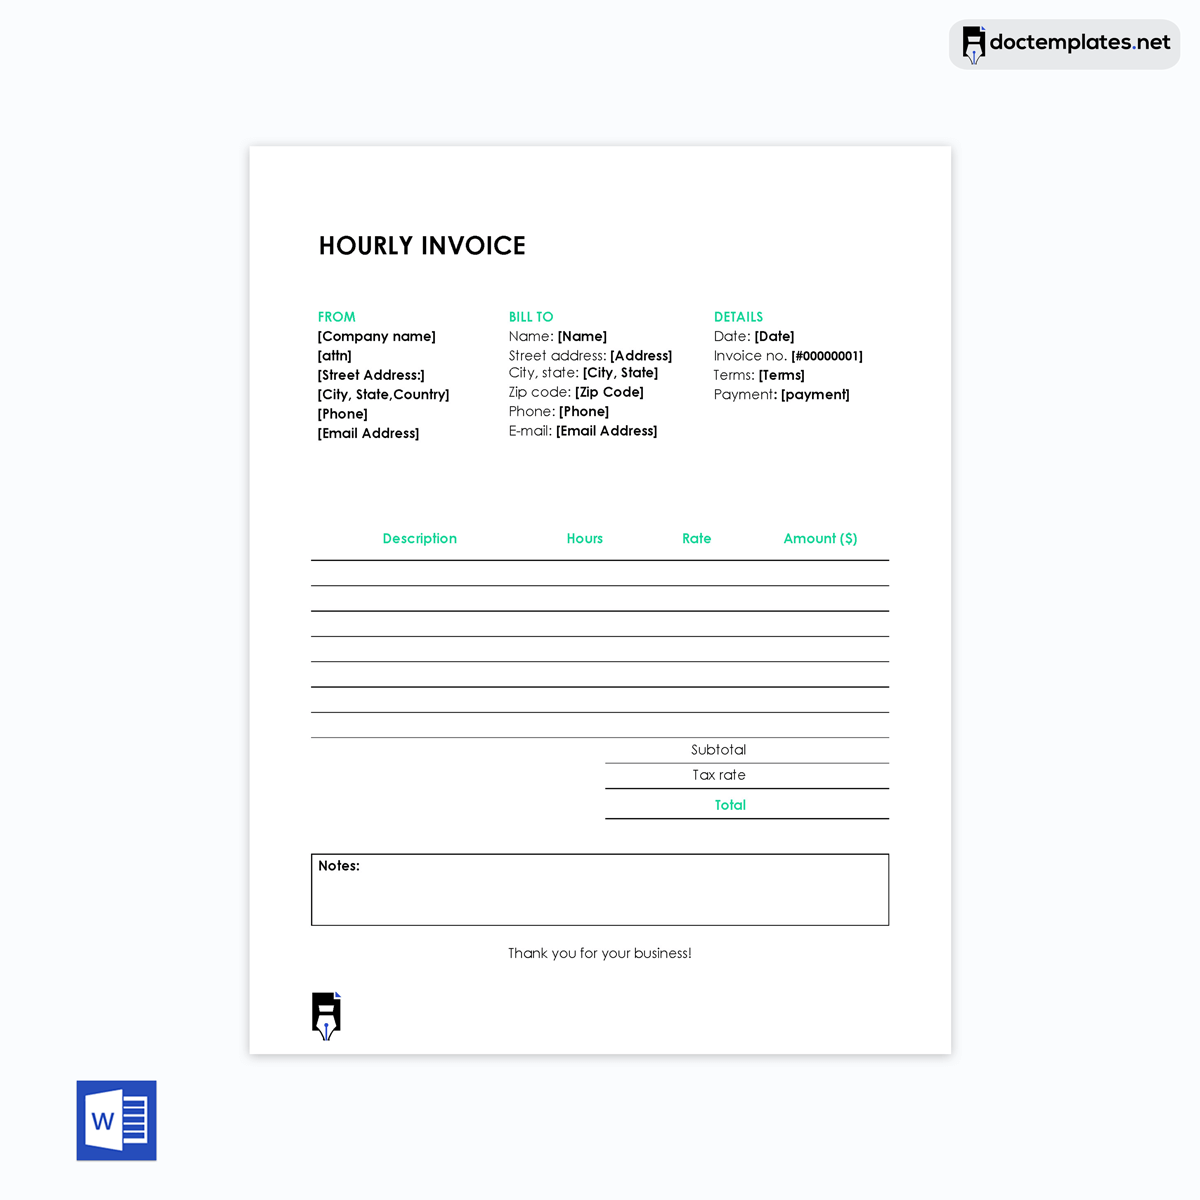  hourly invoice template word-10